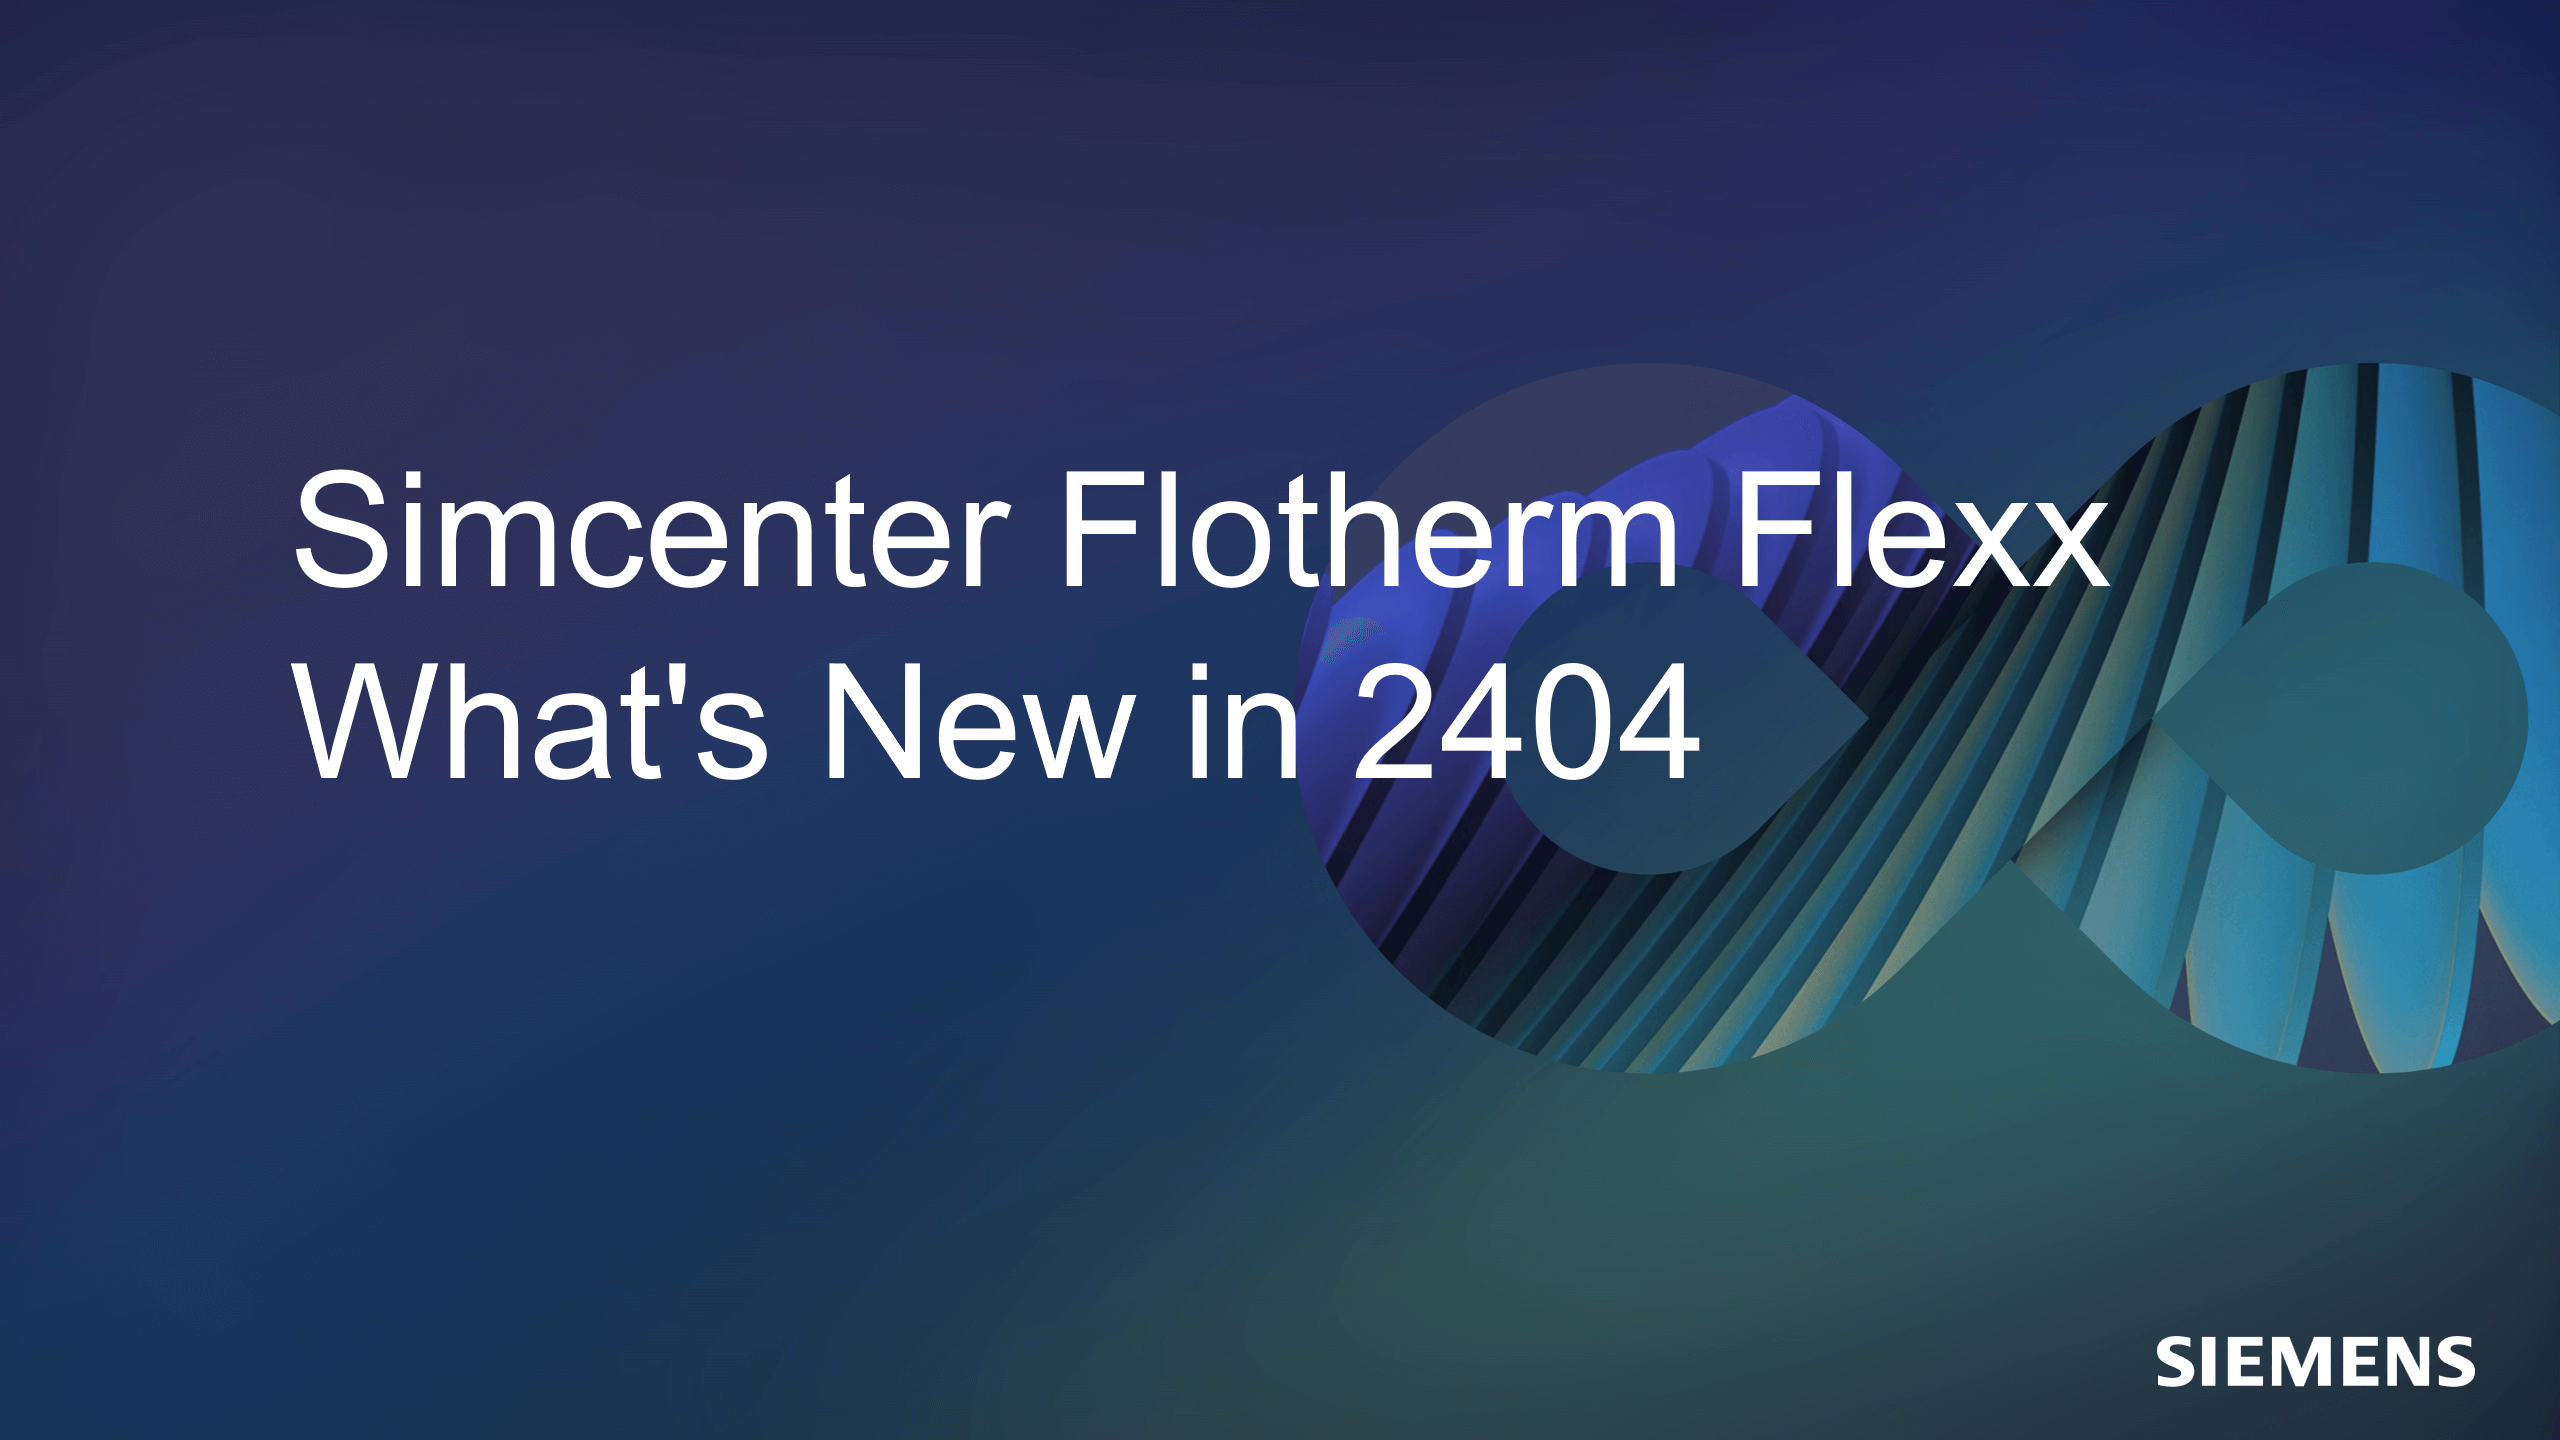 What’s new in Simcenter Flotherm Flexx 2404 software releases!